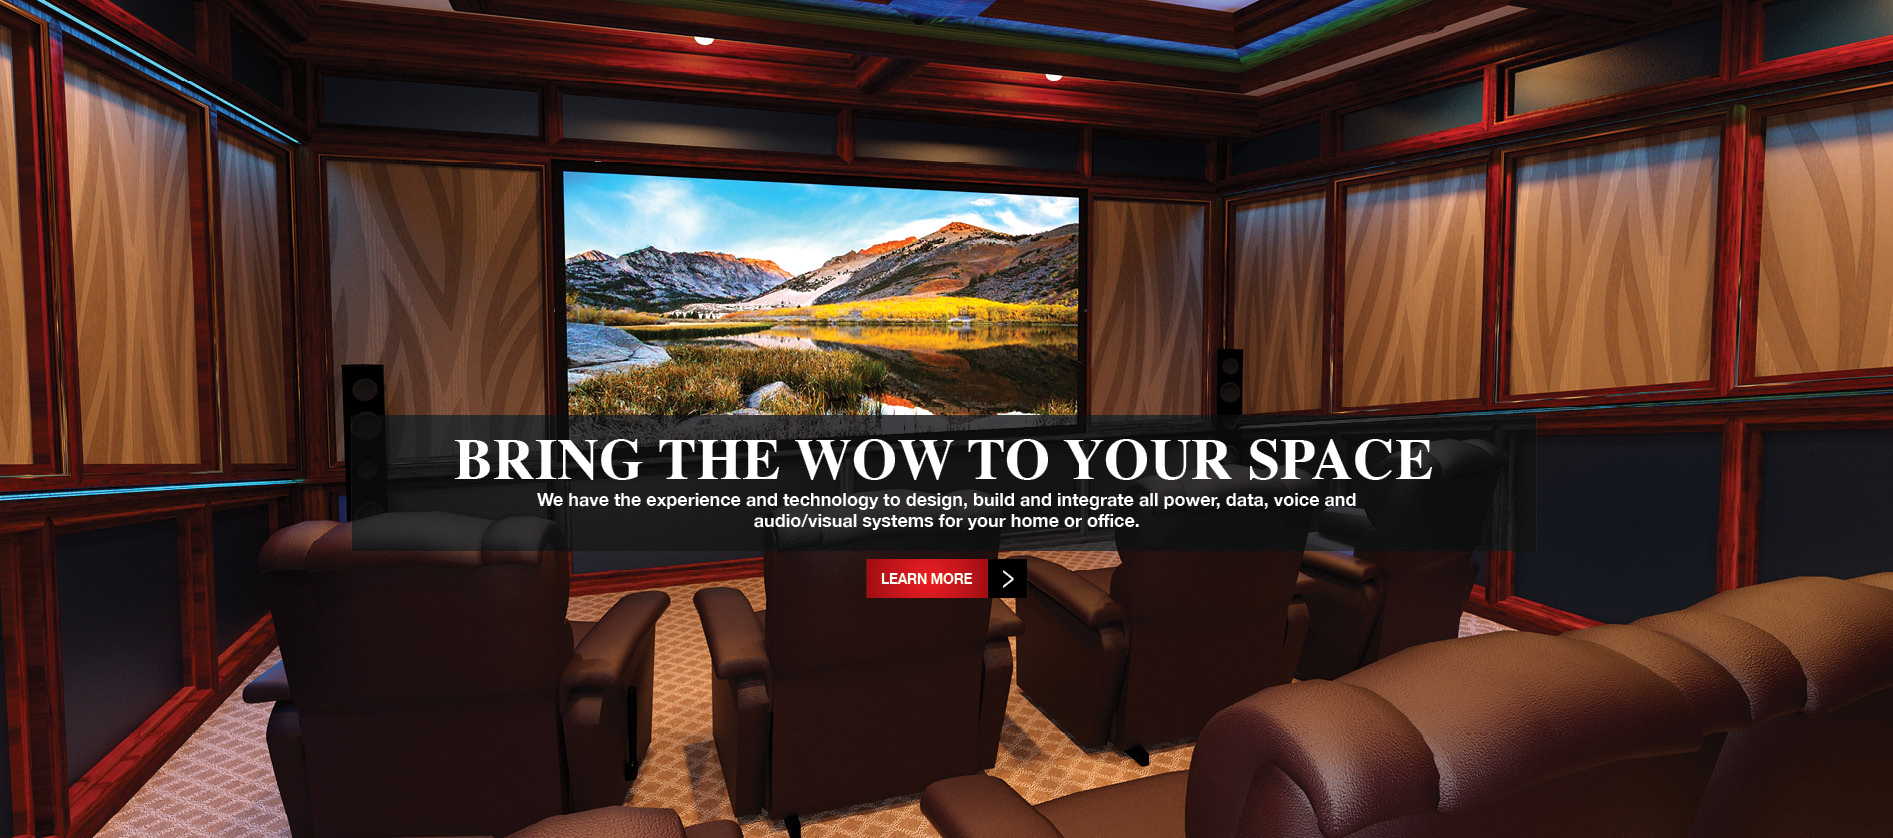 Bring the WOW to your space - We have the experience and technology to design, build and integrate all power, data, voice and audio/visual systems for your home or office.